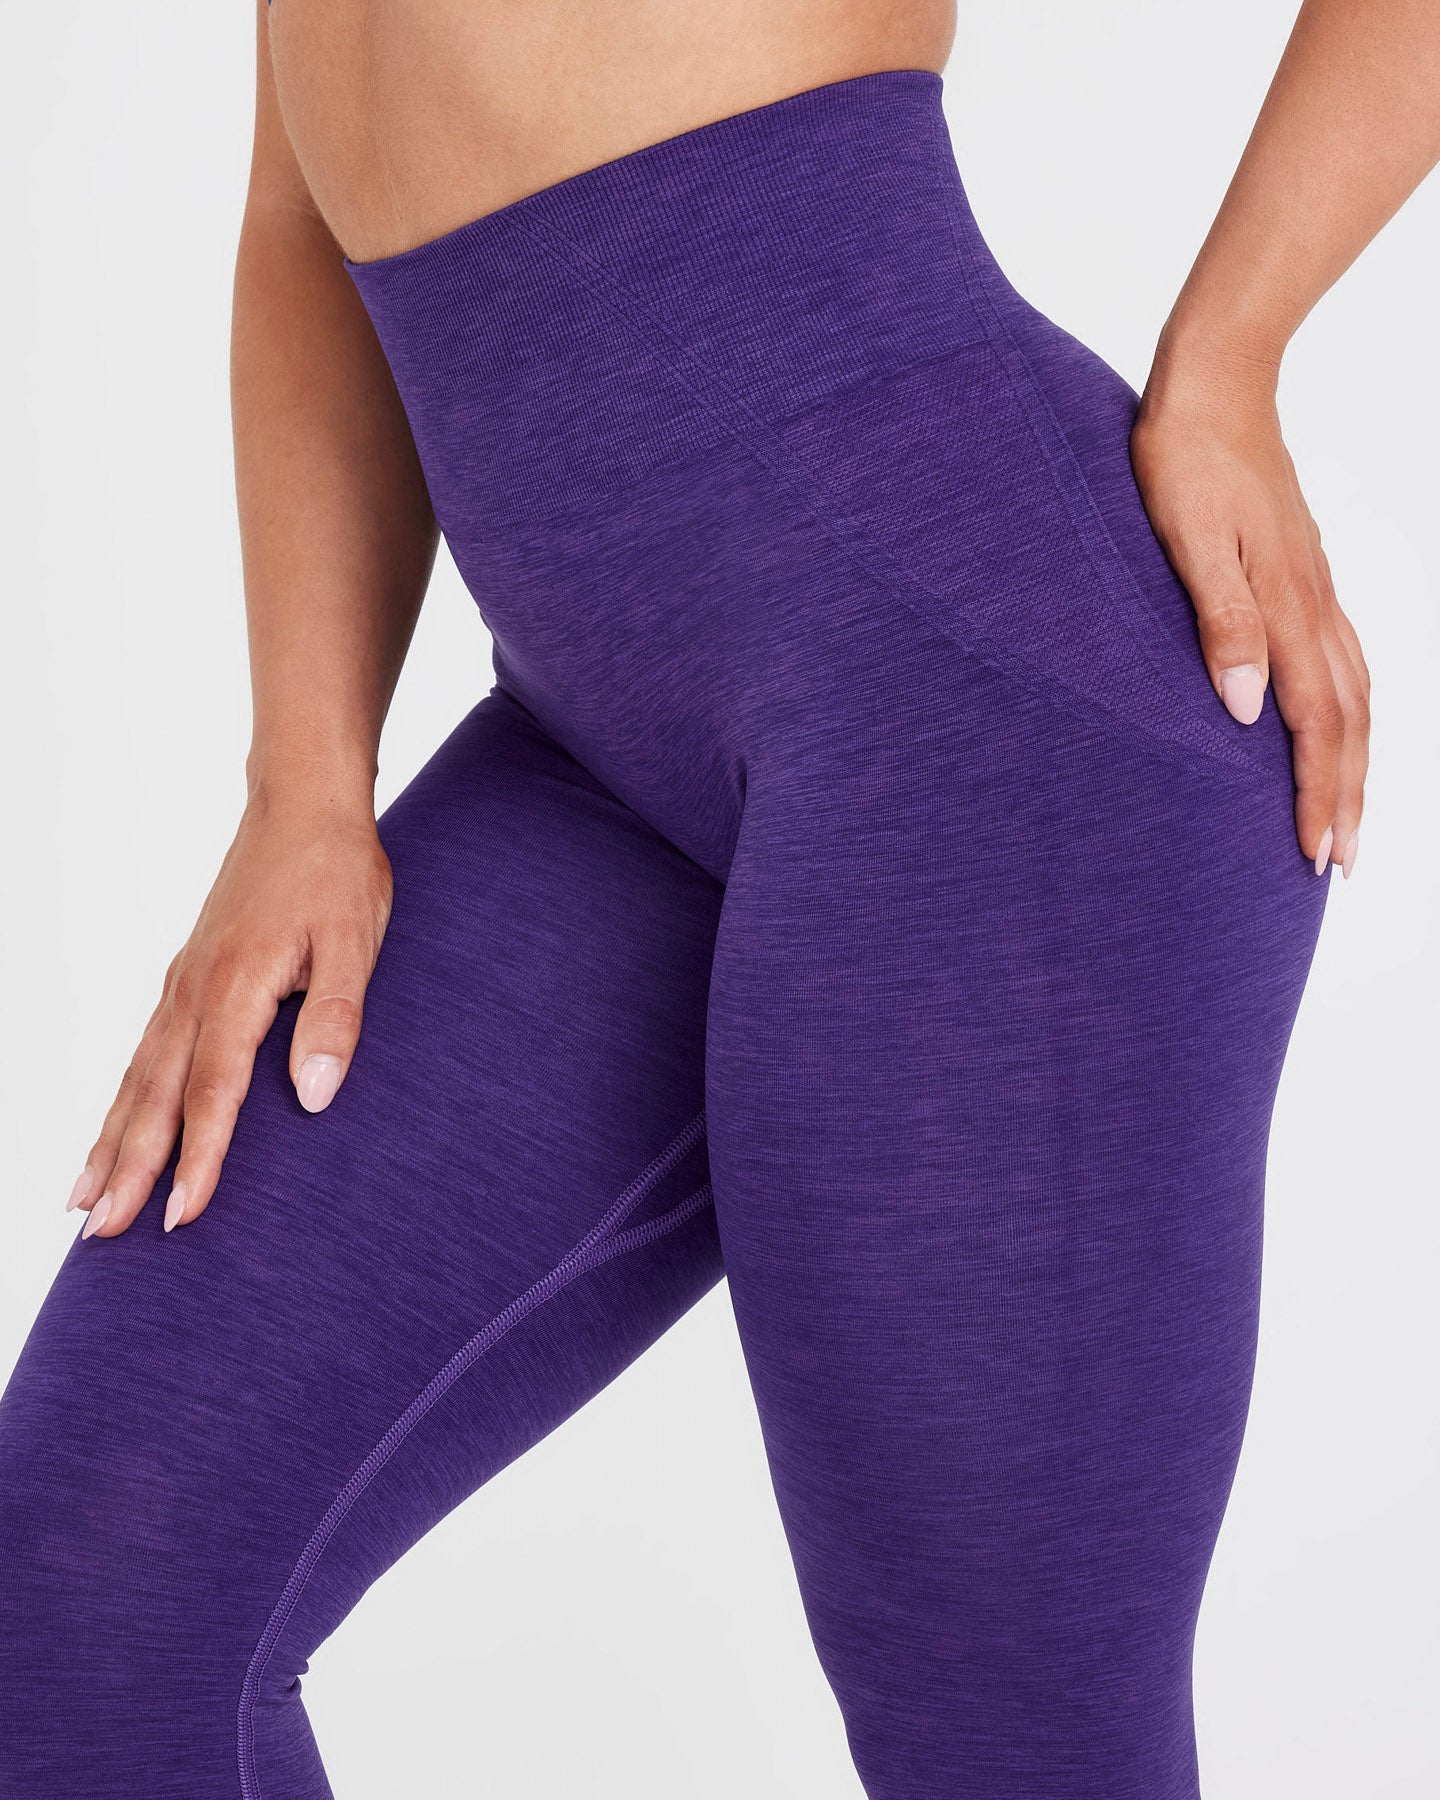 Lavender Leggings – Indie Collection